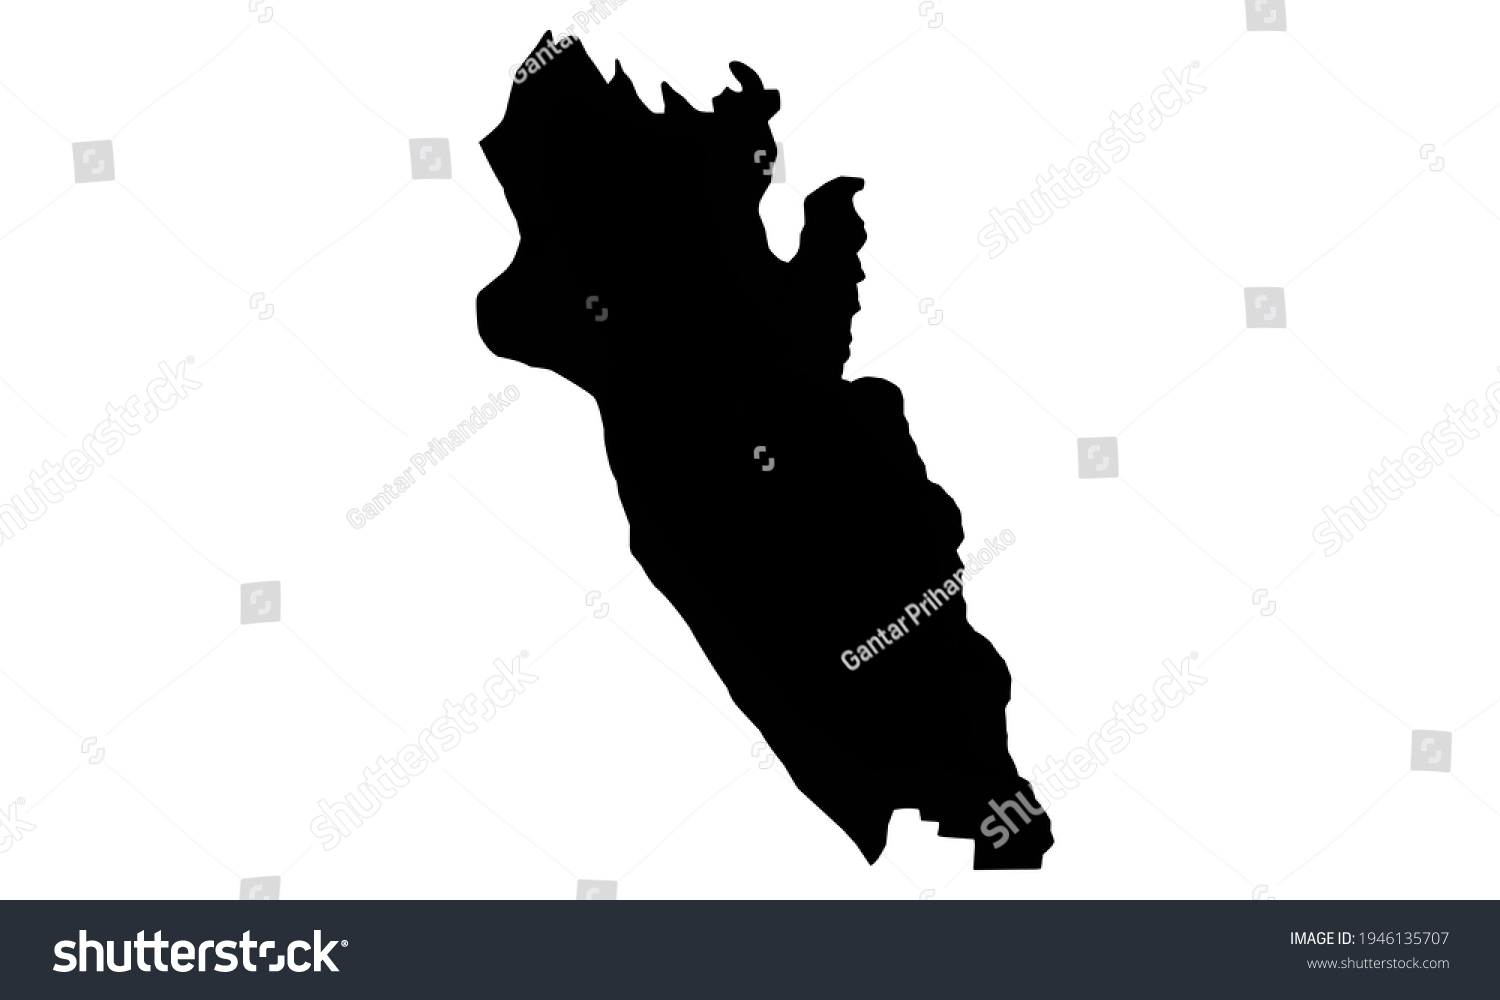 Stock Vector Black Silhouette Of City Map Of Moapa Valley In Nevada United States Of America On White Background 1946135707 